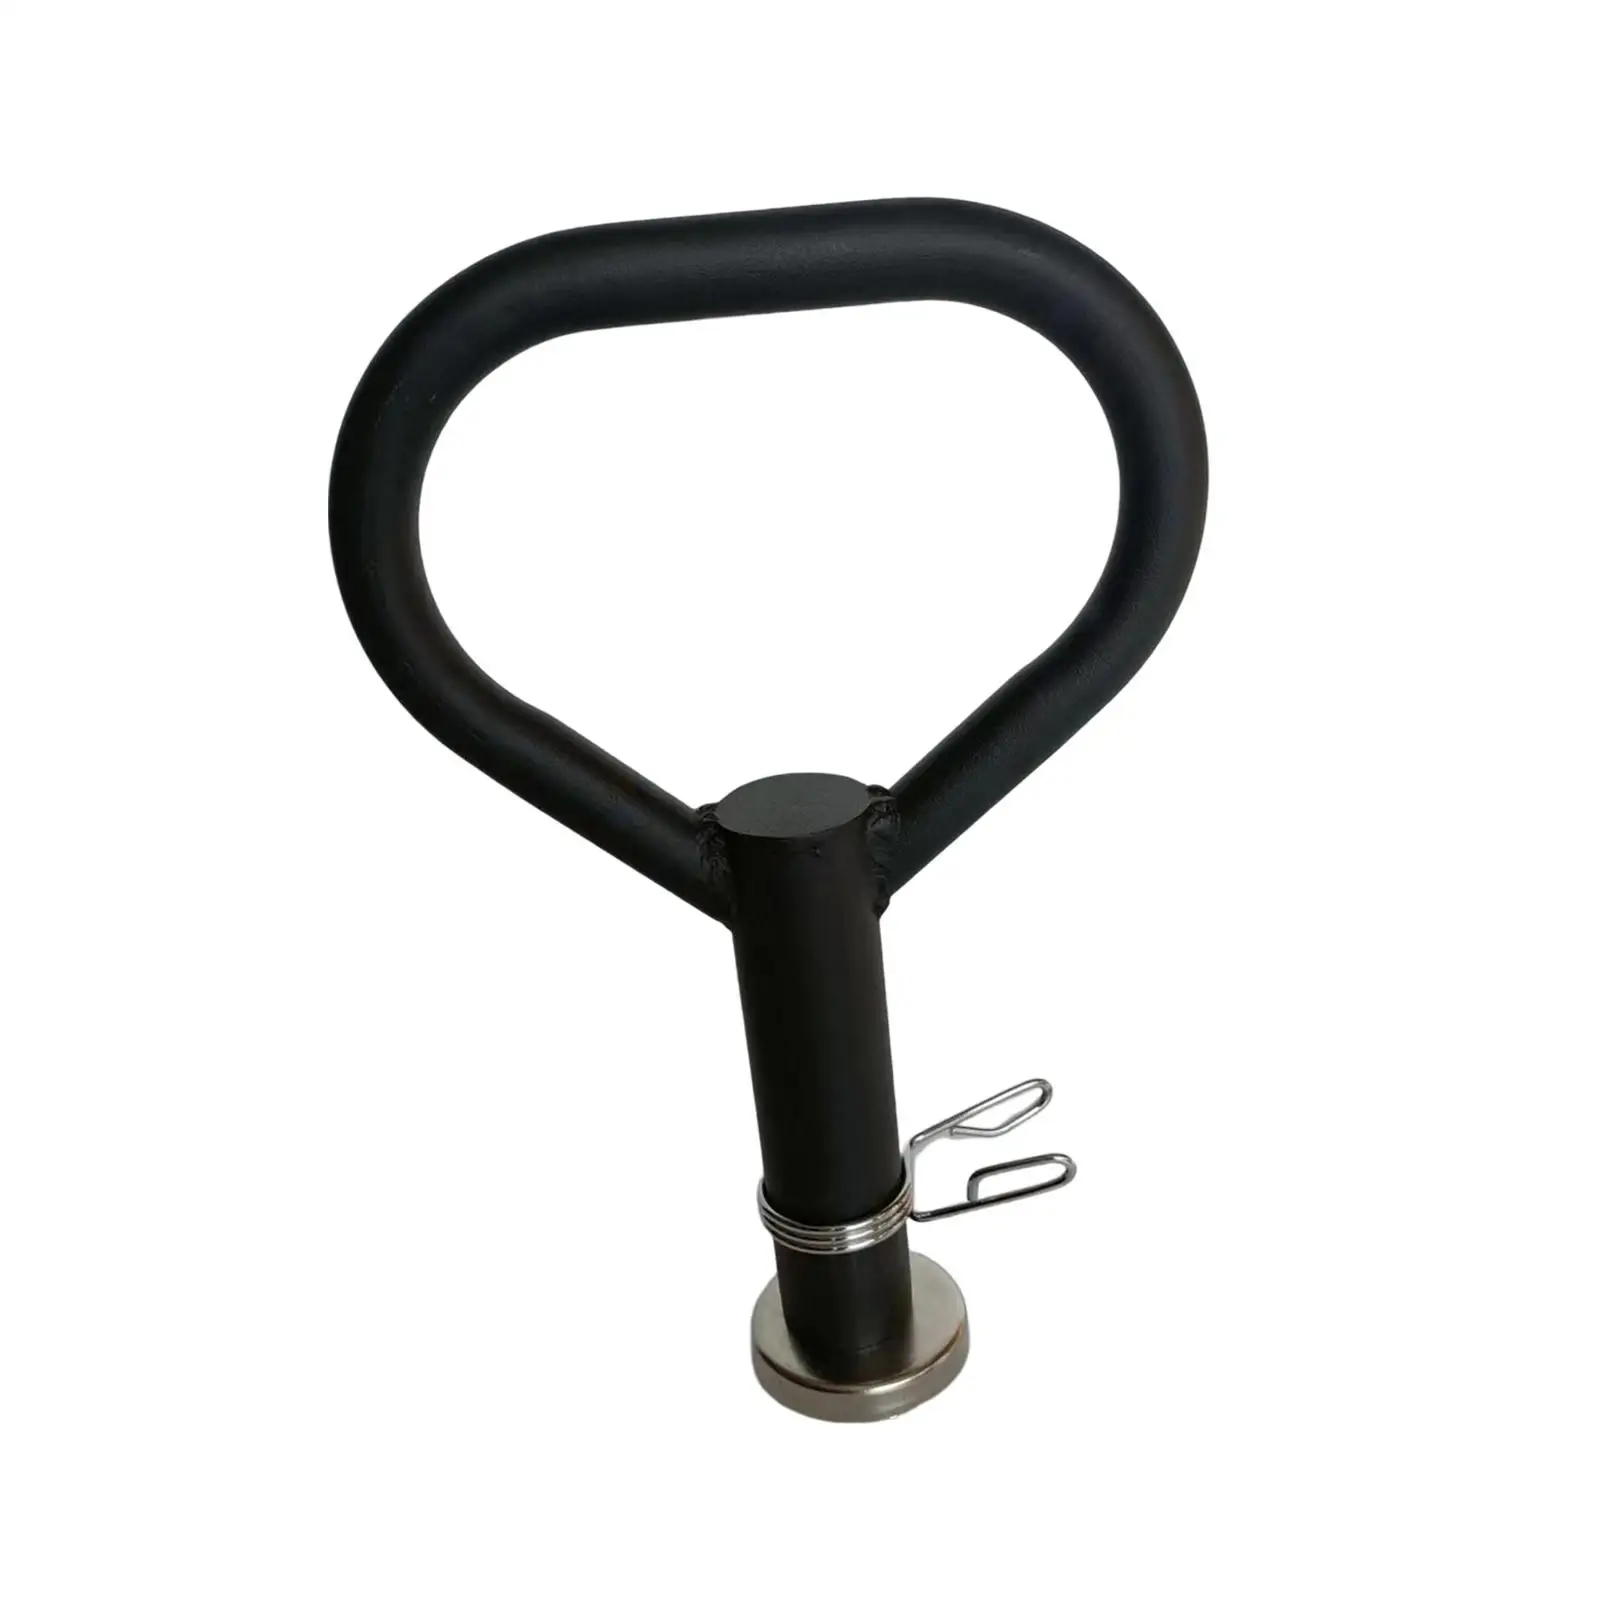 Detachable Kettlebell Handle Fittings, Multifunctional, Convenient with Parts,